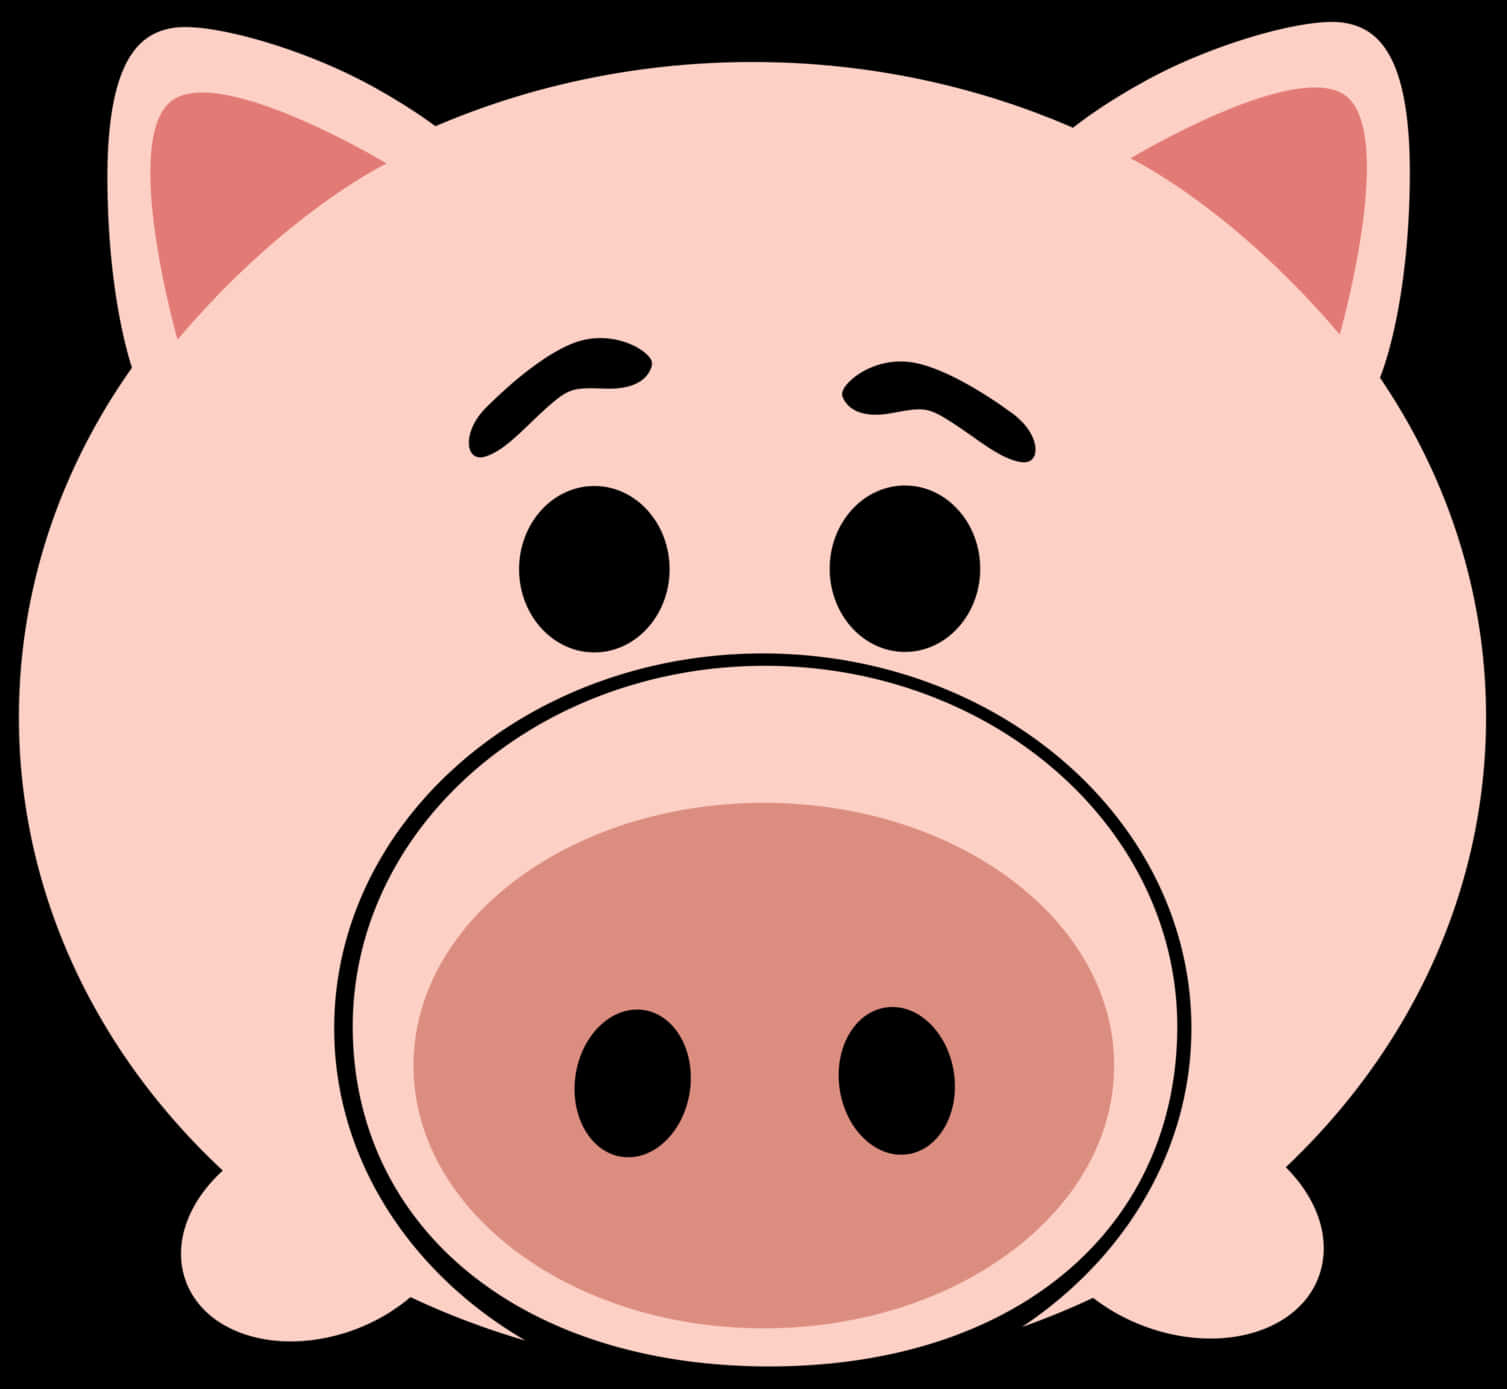 Worried Pig Cartoon Graphic PNG image